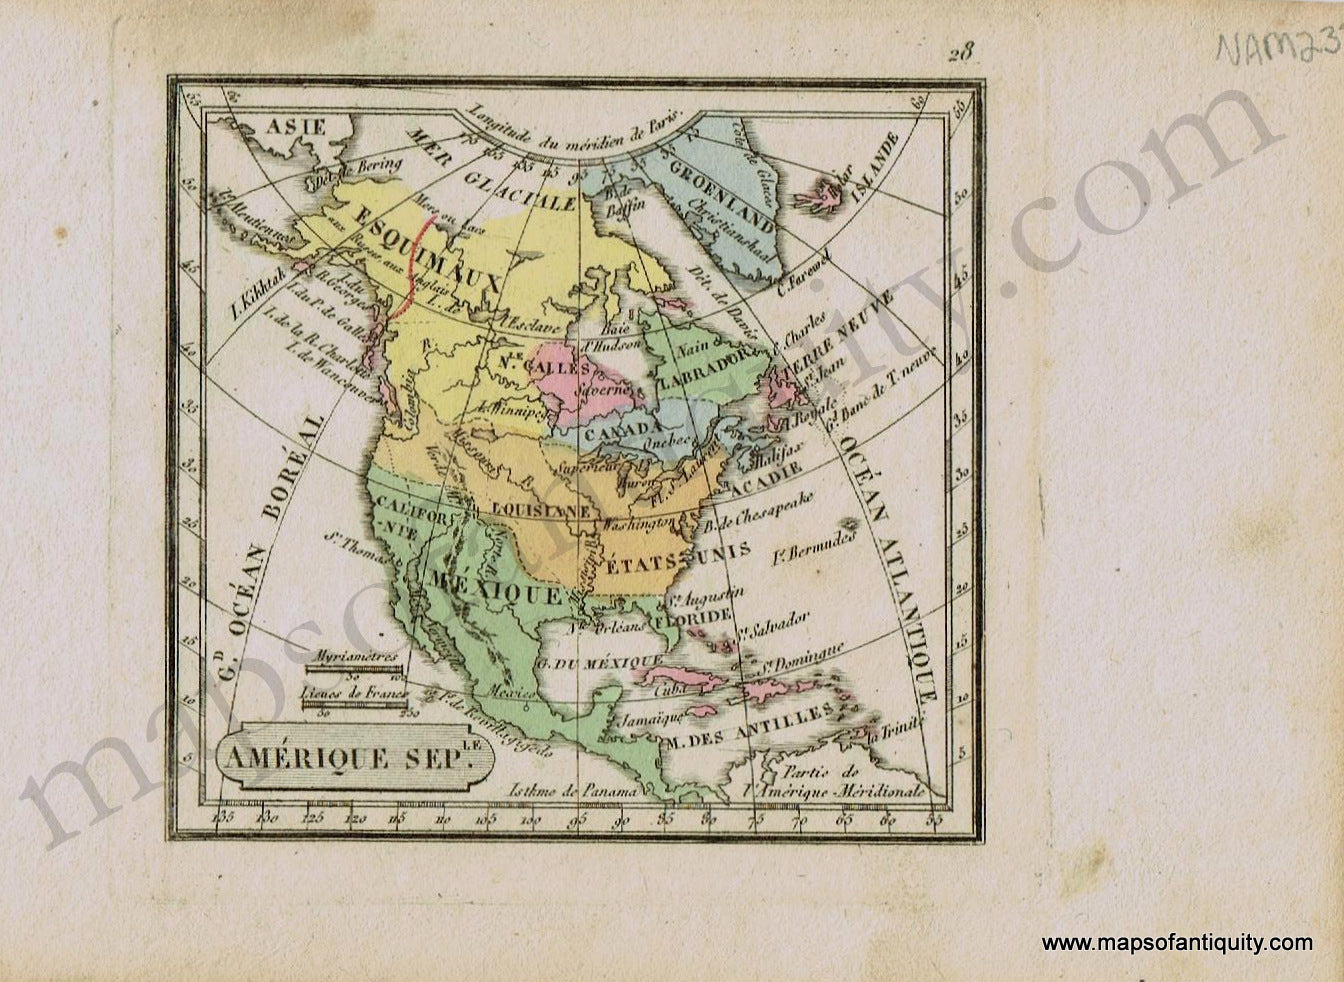 Antique-Map-Amerique-Septentrionale-North-America-French-Maire-1821-1820s-1800s-Early-19th-Century-Maps-of-Antiquity